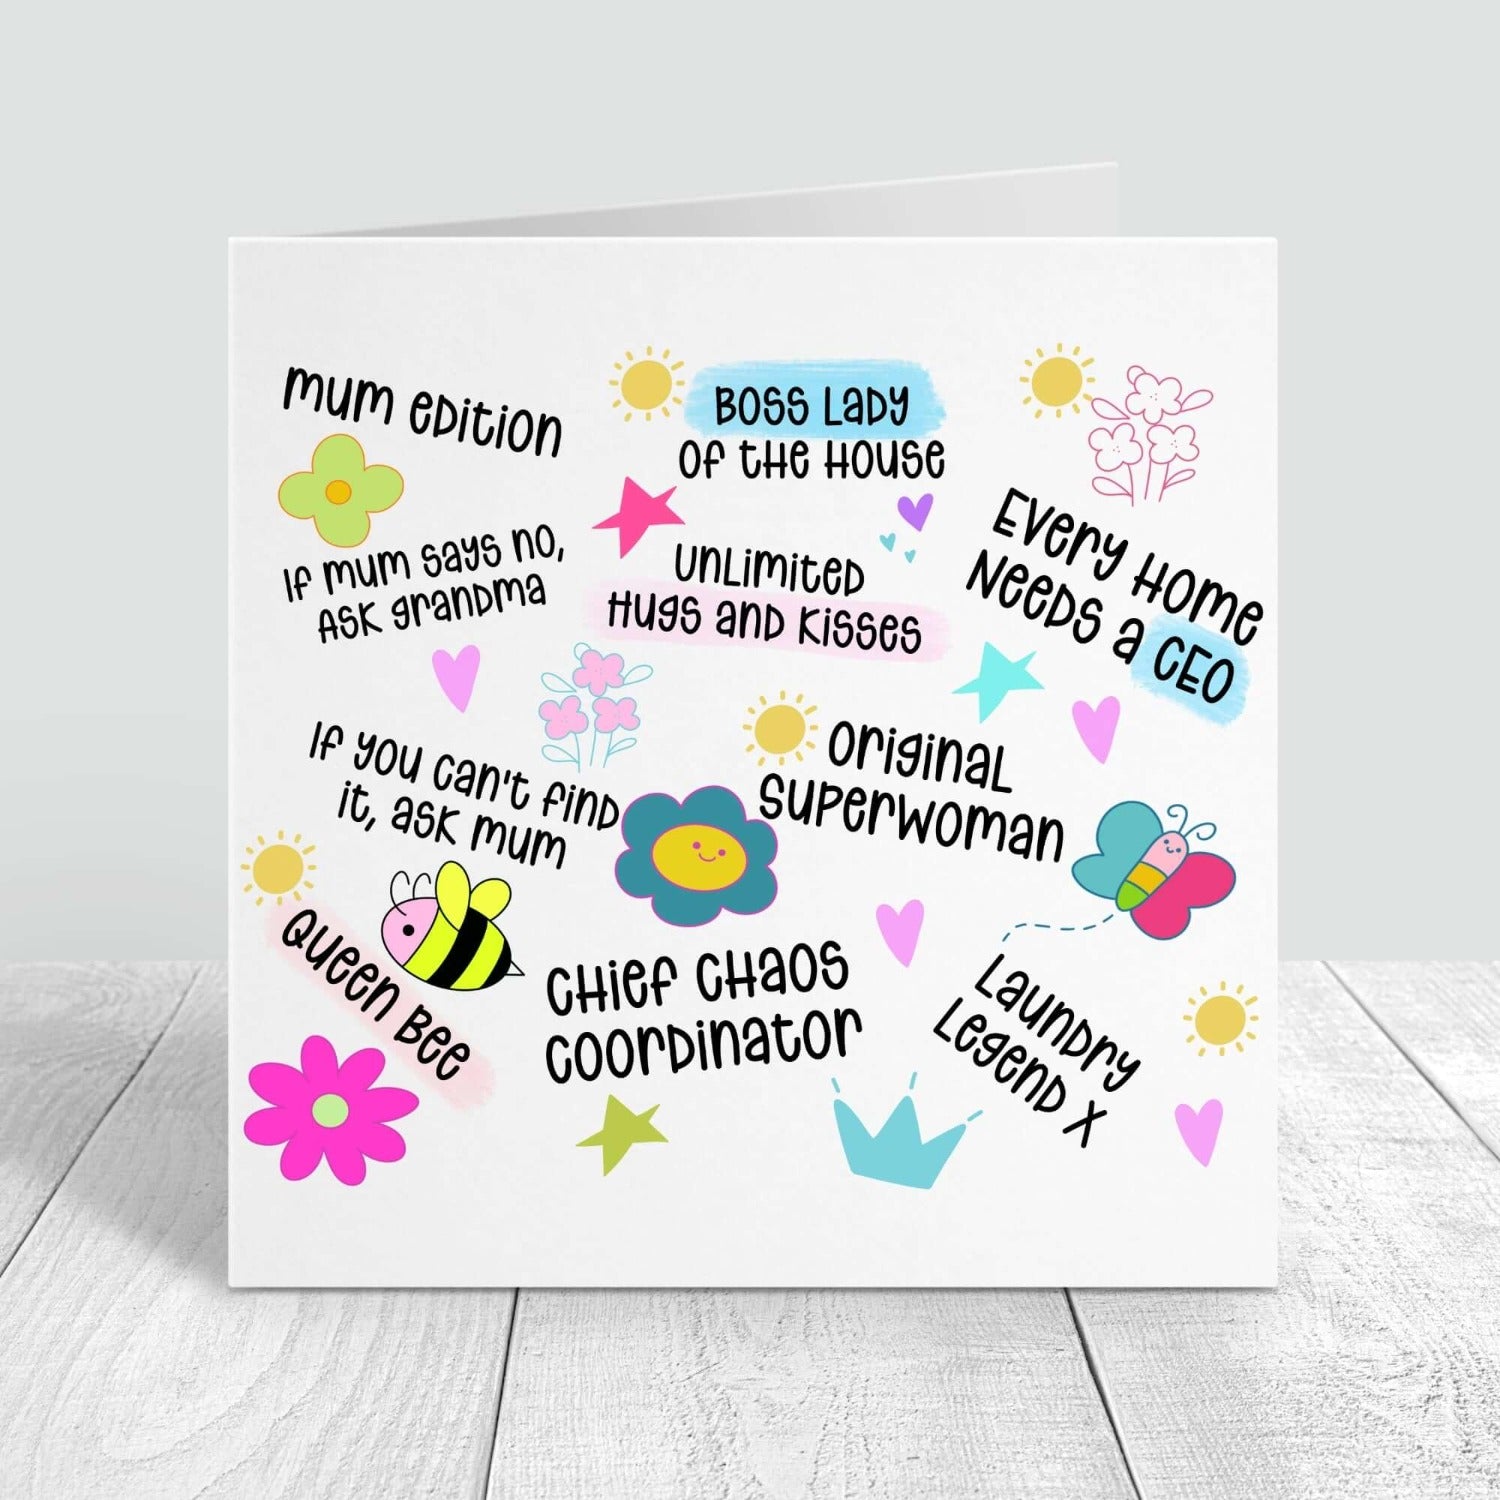 mum edition personalised birthday card with funny quotes